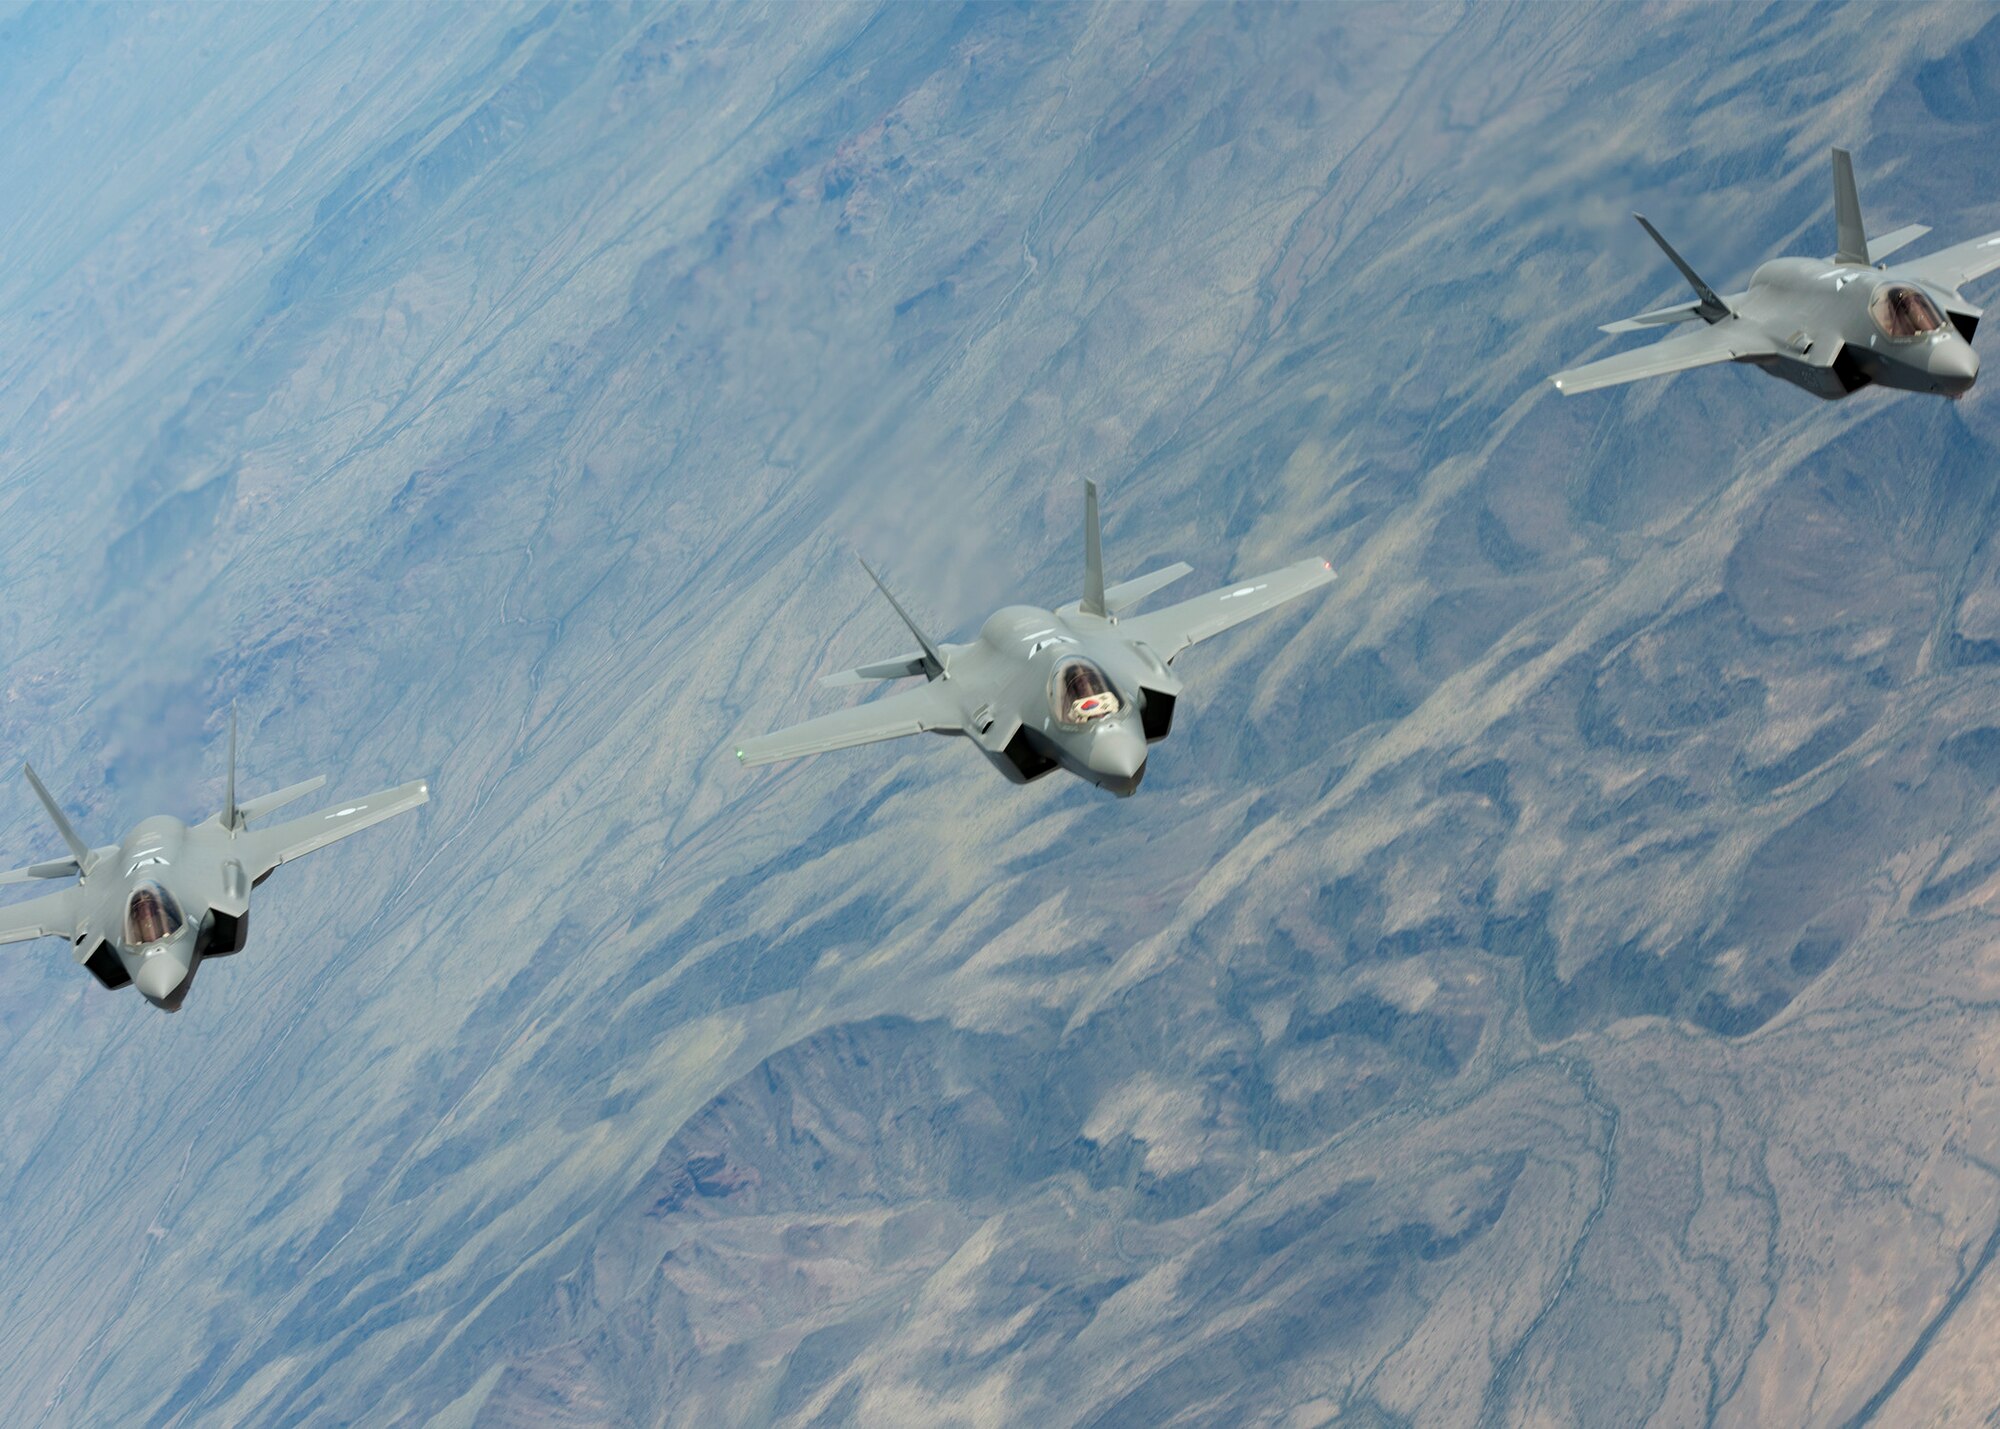 Republic of Korea Air Force, F-35A Lightning IIs fly in formation during a refueling mission March 15, 2019, in Ariz. The F-35’s sensor package is designed to collect, fuse and distribute more information than any fighter jet in history, giving pilots an advantage over all adversaries. (U.S. Air Force photo by Airman 1st Class Leala Marquez)